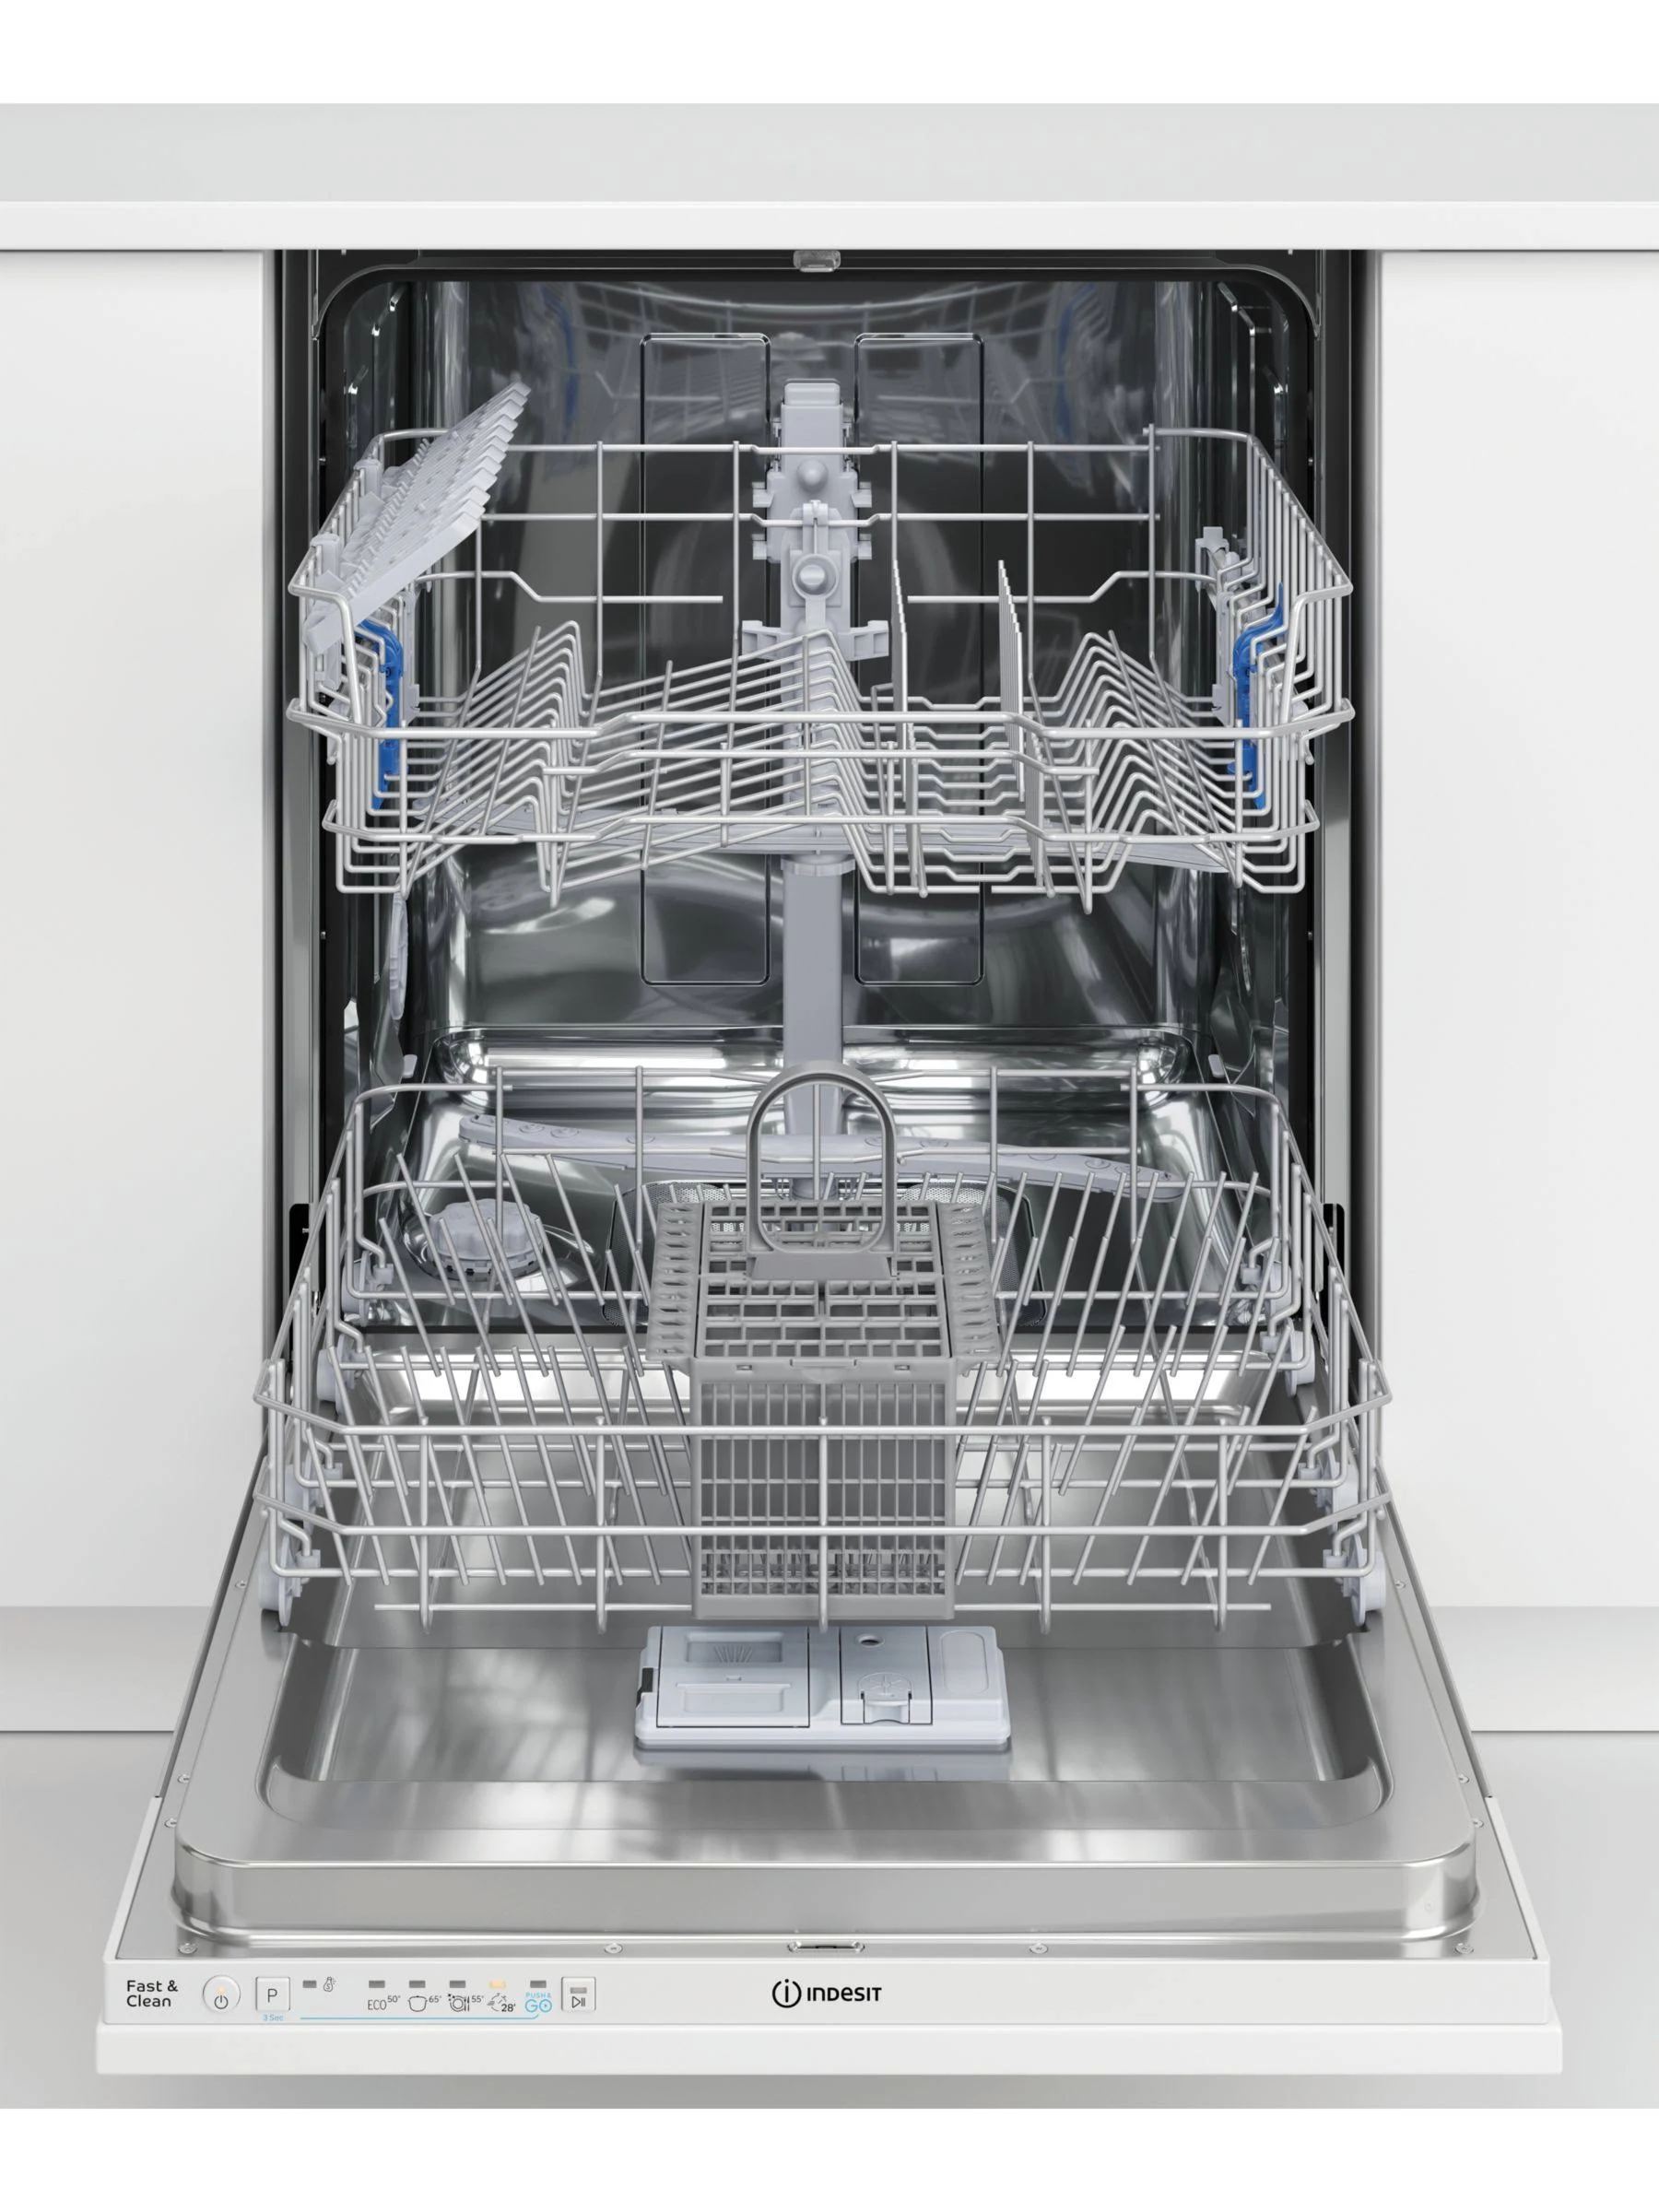 Indesit Integrated Dishwasher 600mm Full Size, White Colour - DIE 2B19 UK